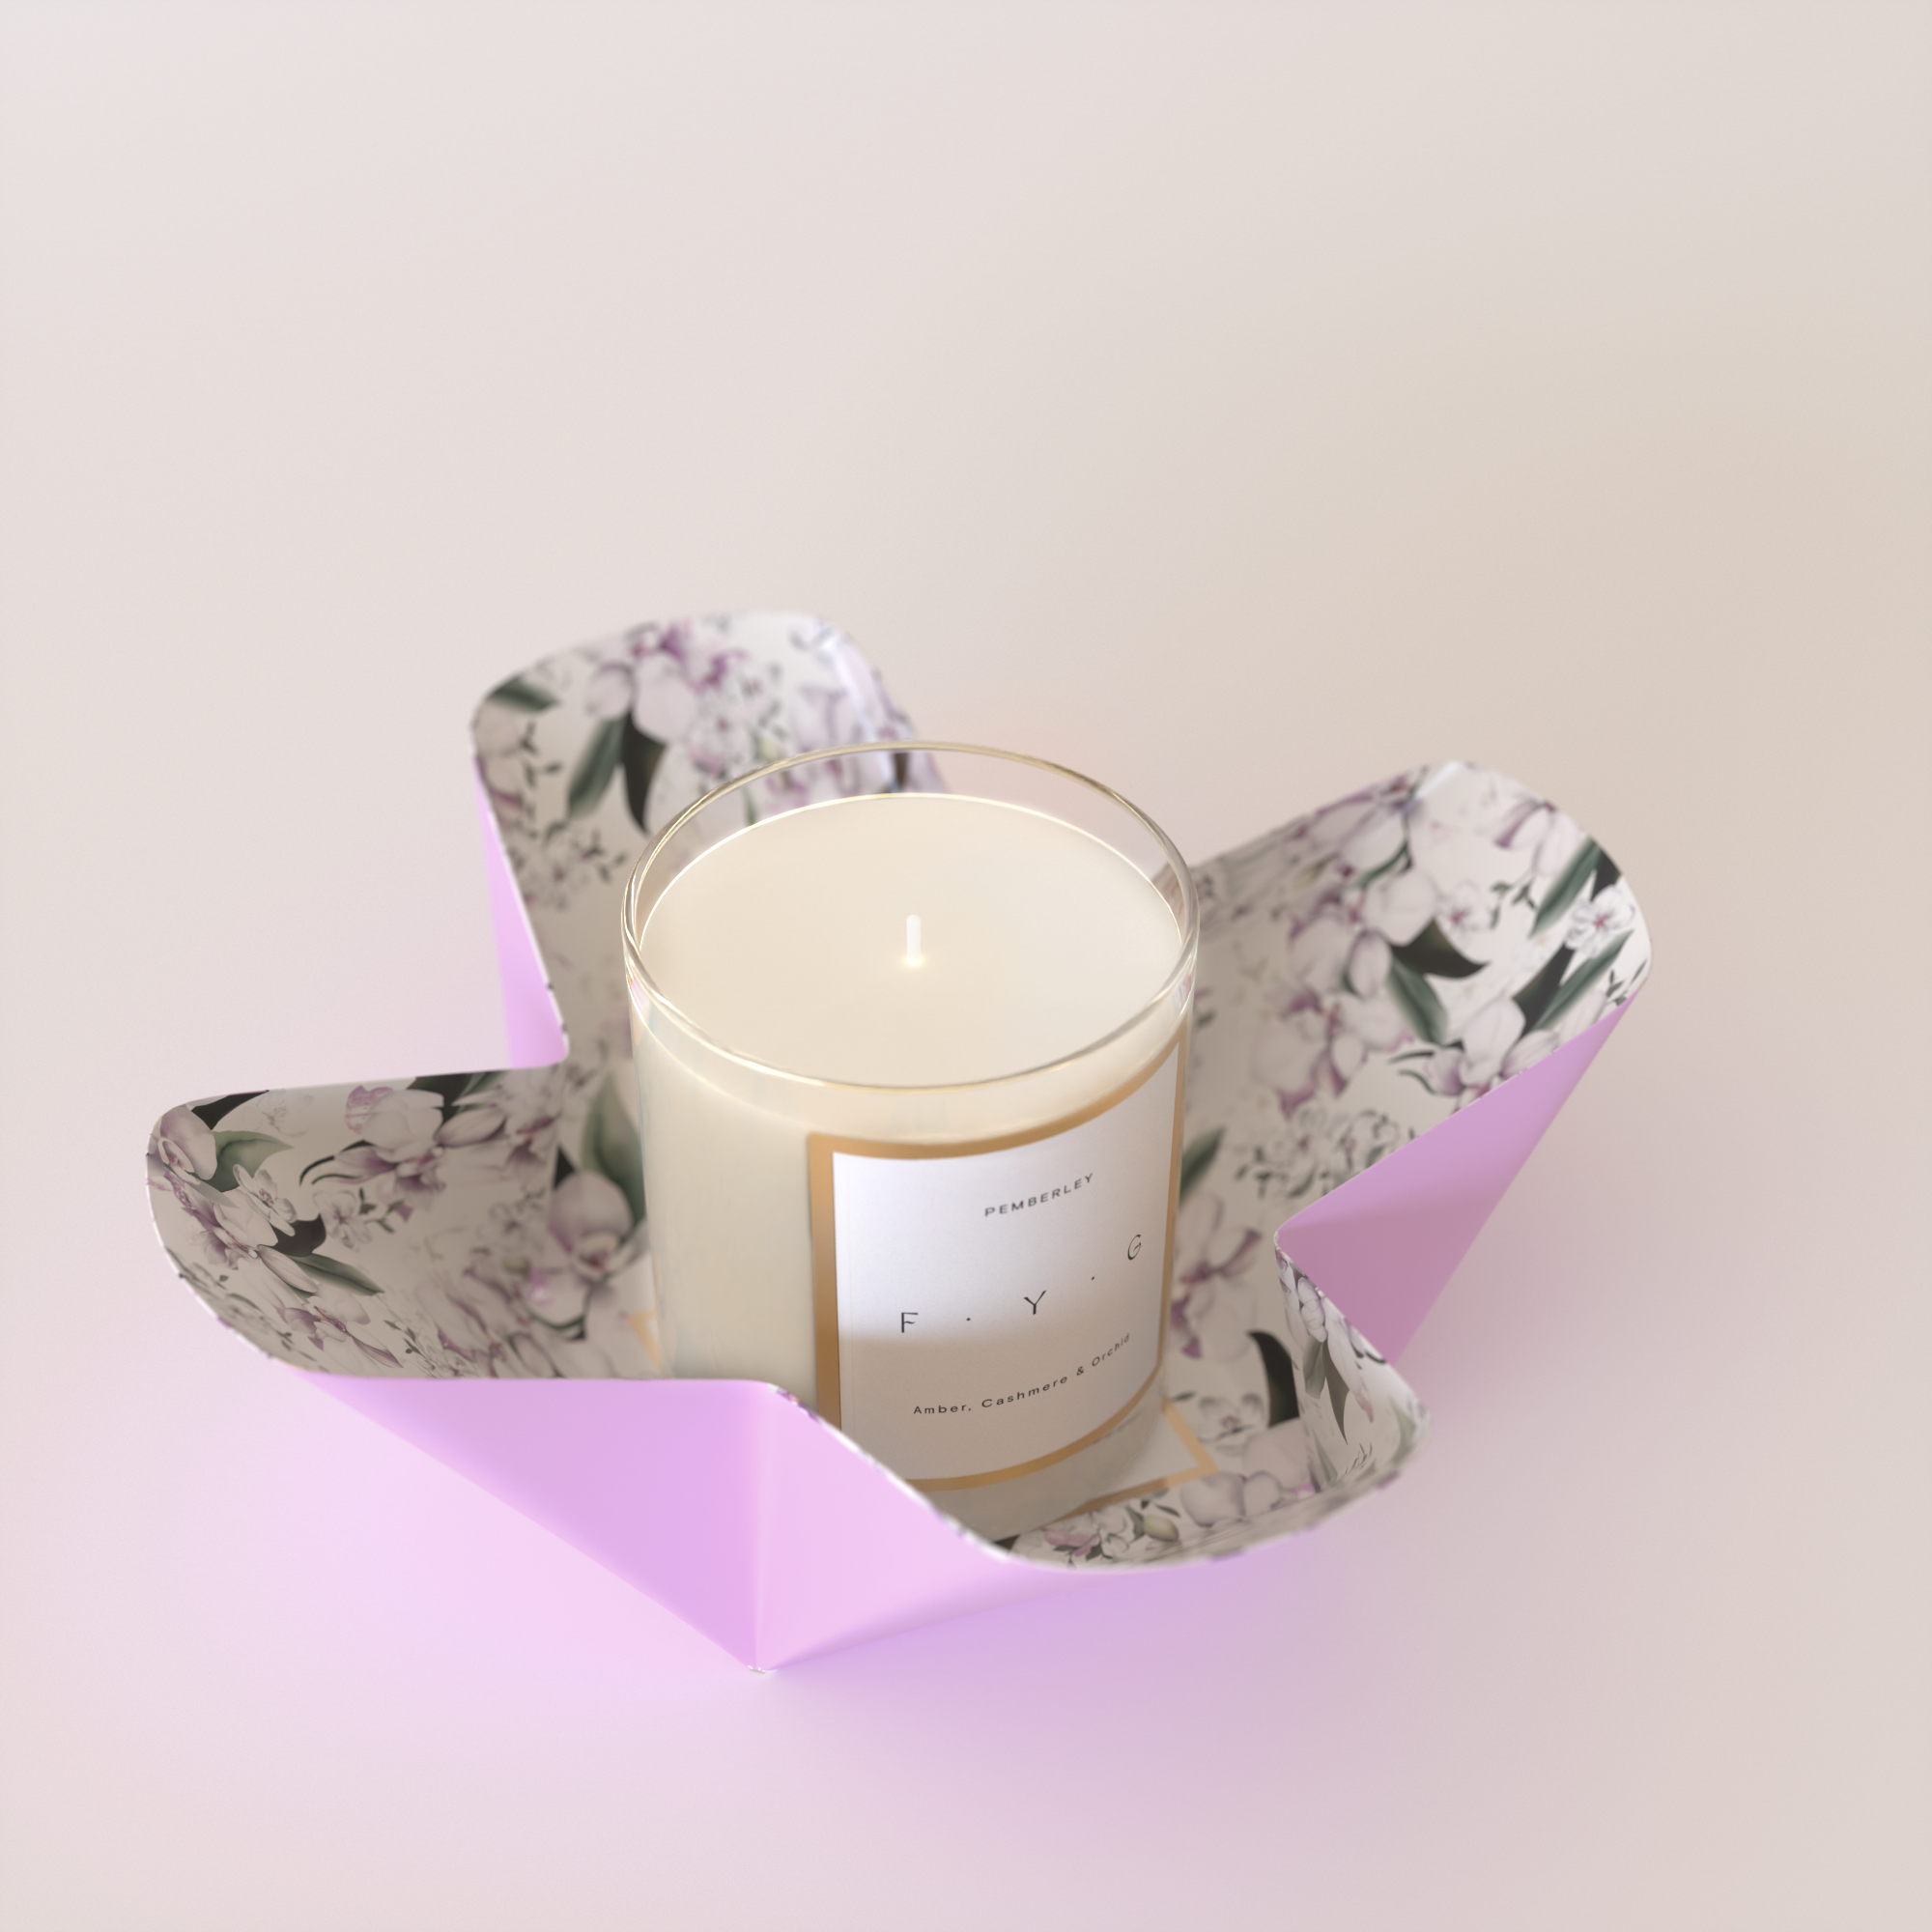 Find Your Glow Pemberley Candle